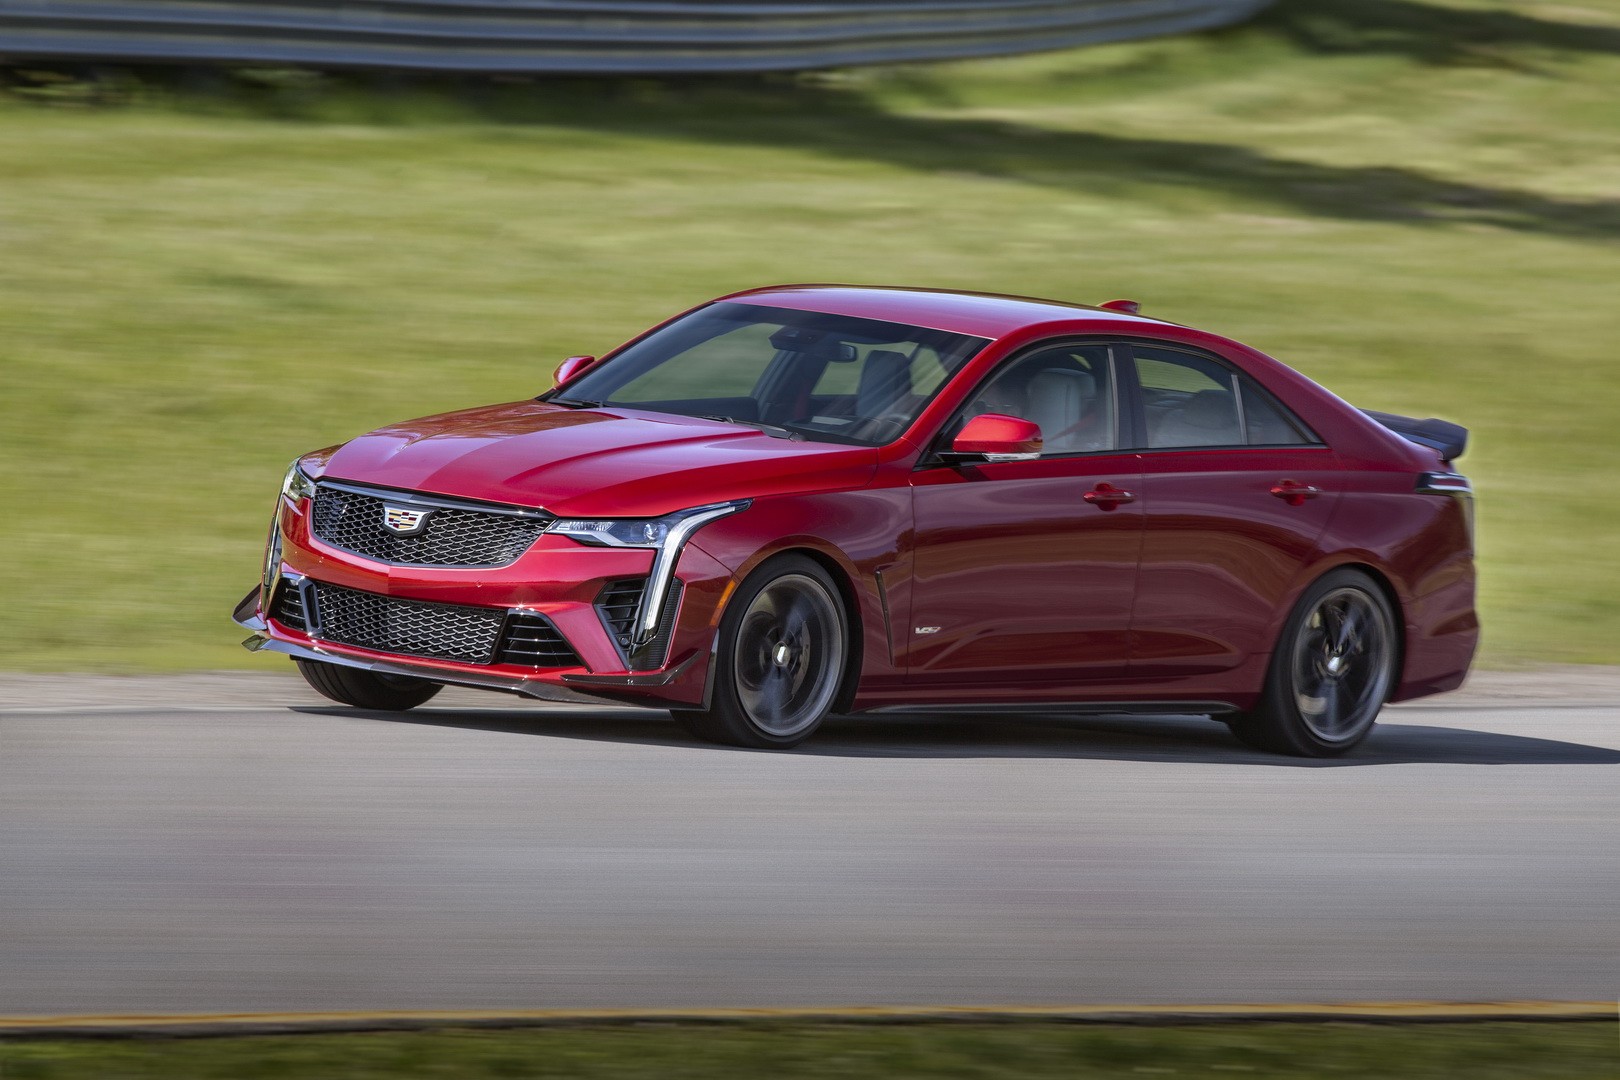 CT4-V Blackwing is Officially Cadillac’s Highest Downforce V-Series